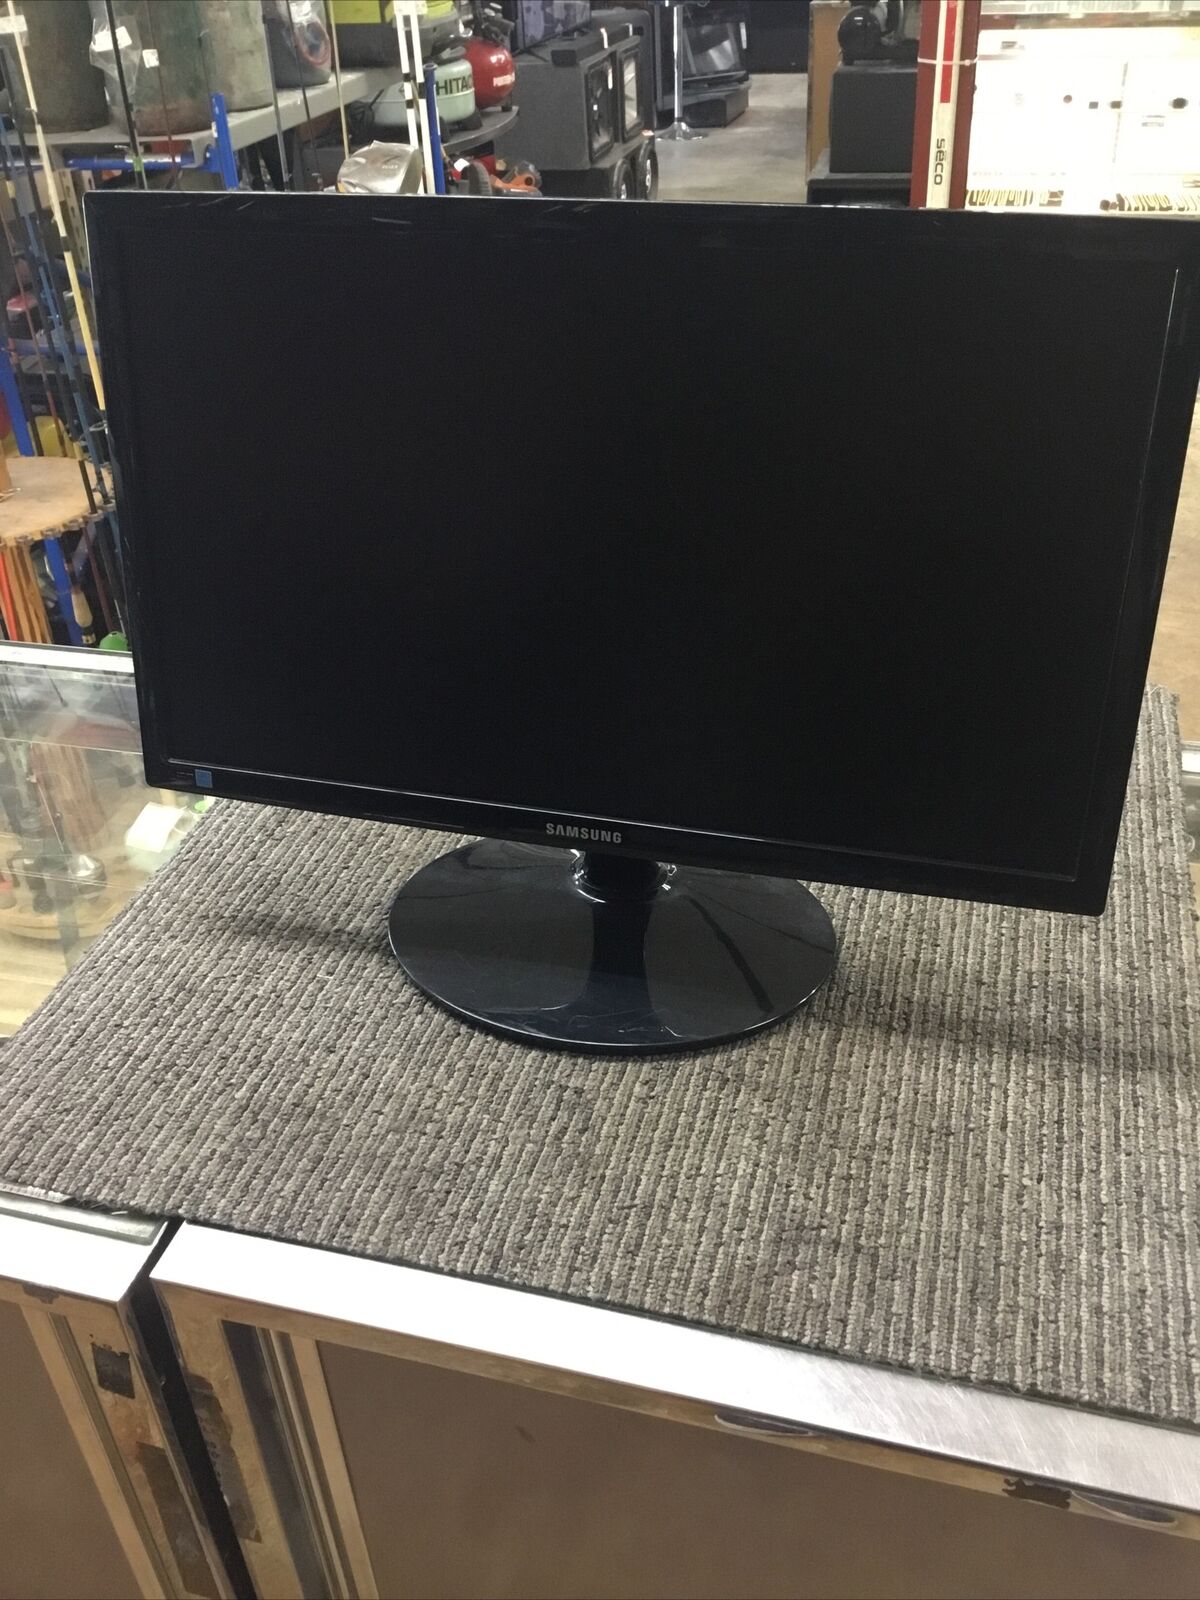 Samsung Syncmaster S22B150N Monitor Only